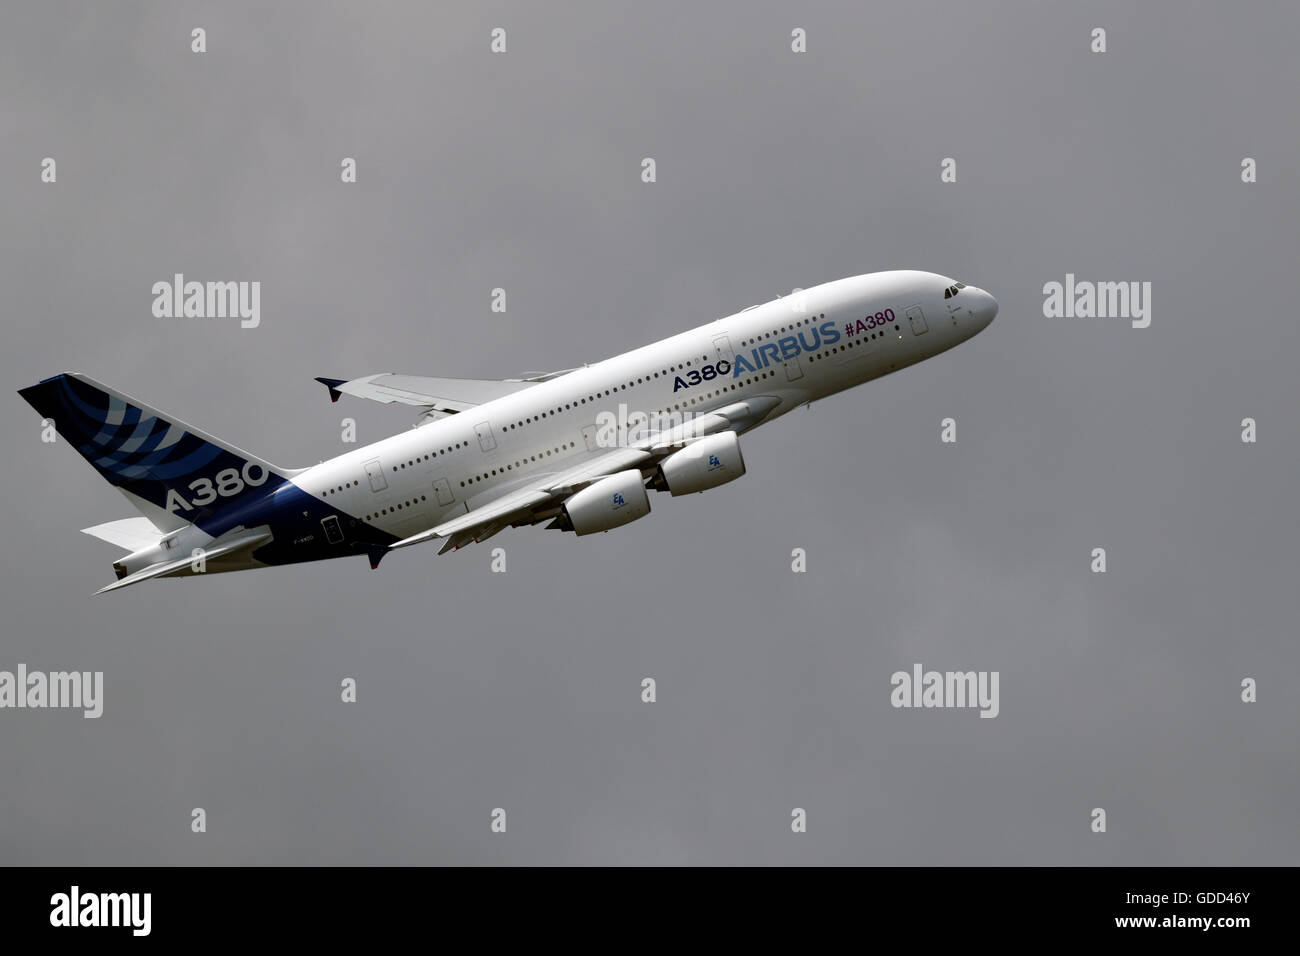 An Airbus A380 flies during the Farnborough International Airshow in July 2016. It is the world's largest passenger airliner. Stock Photo